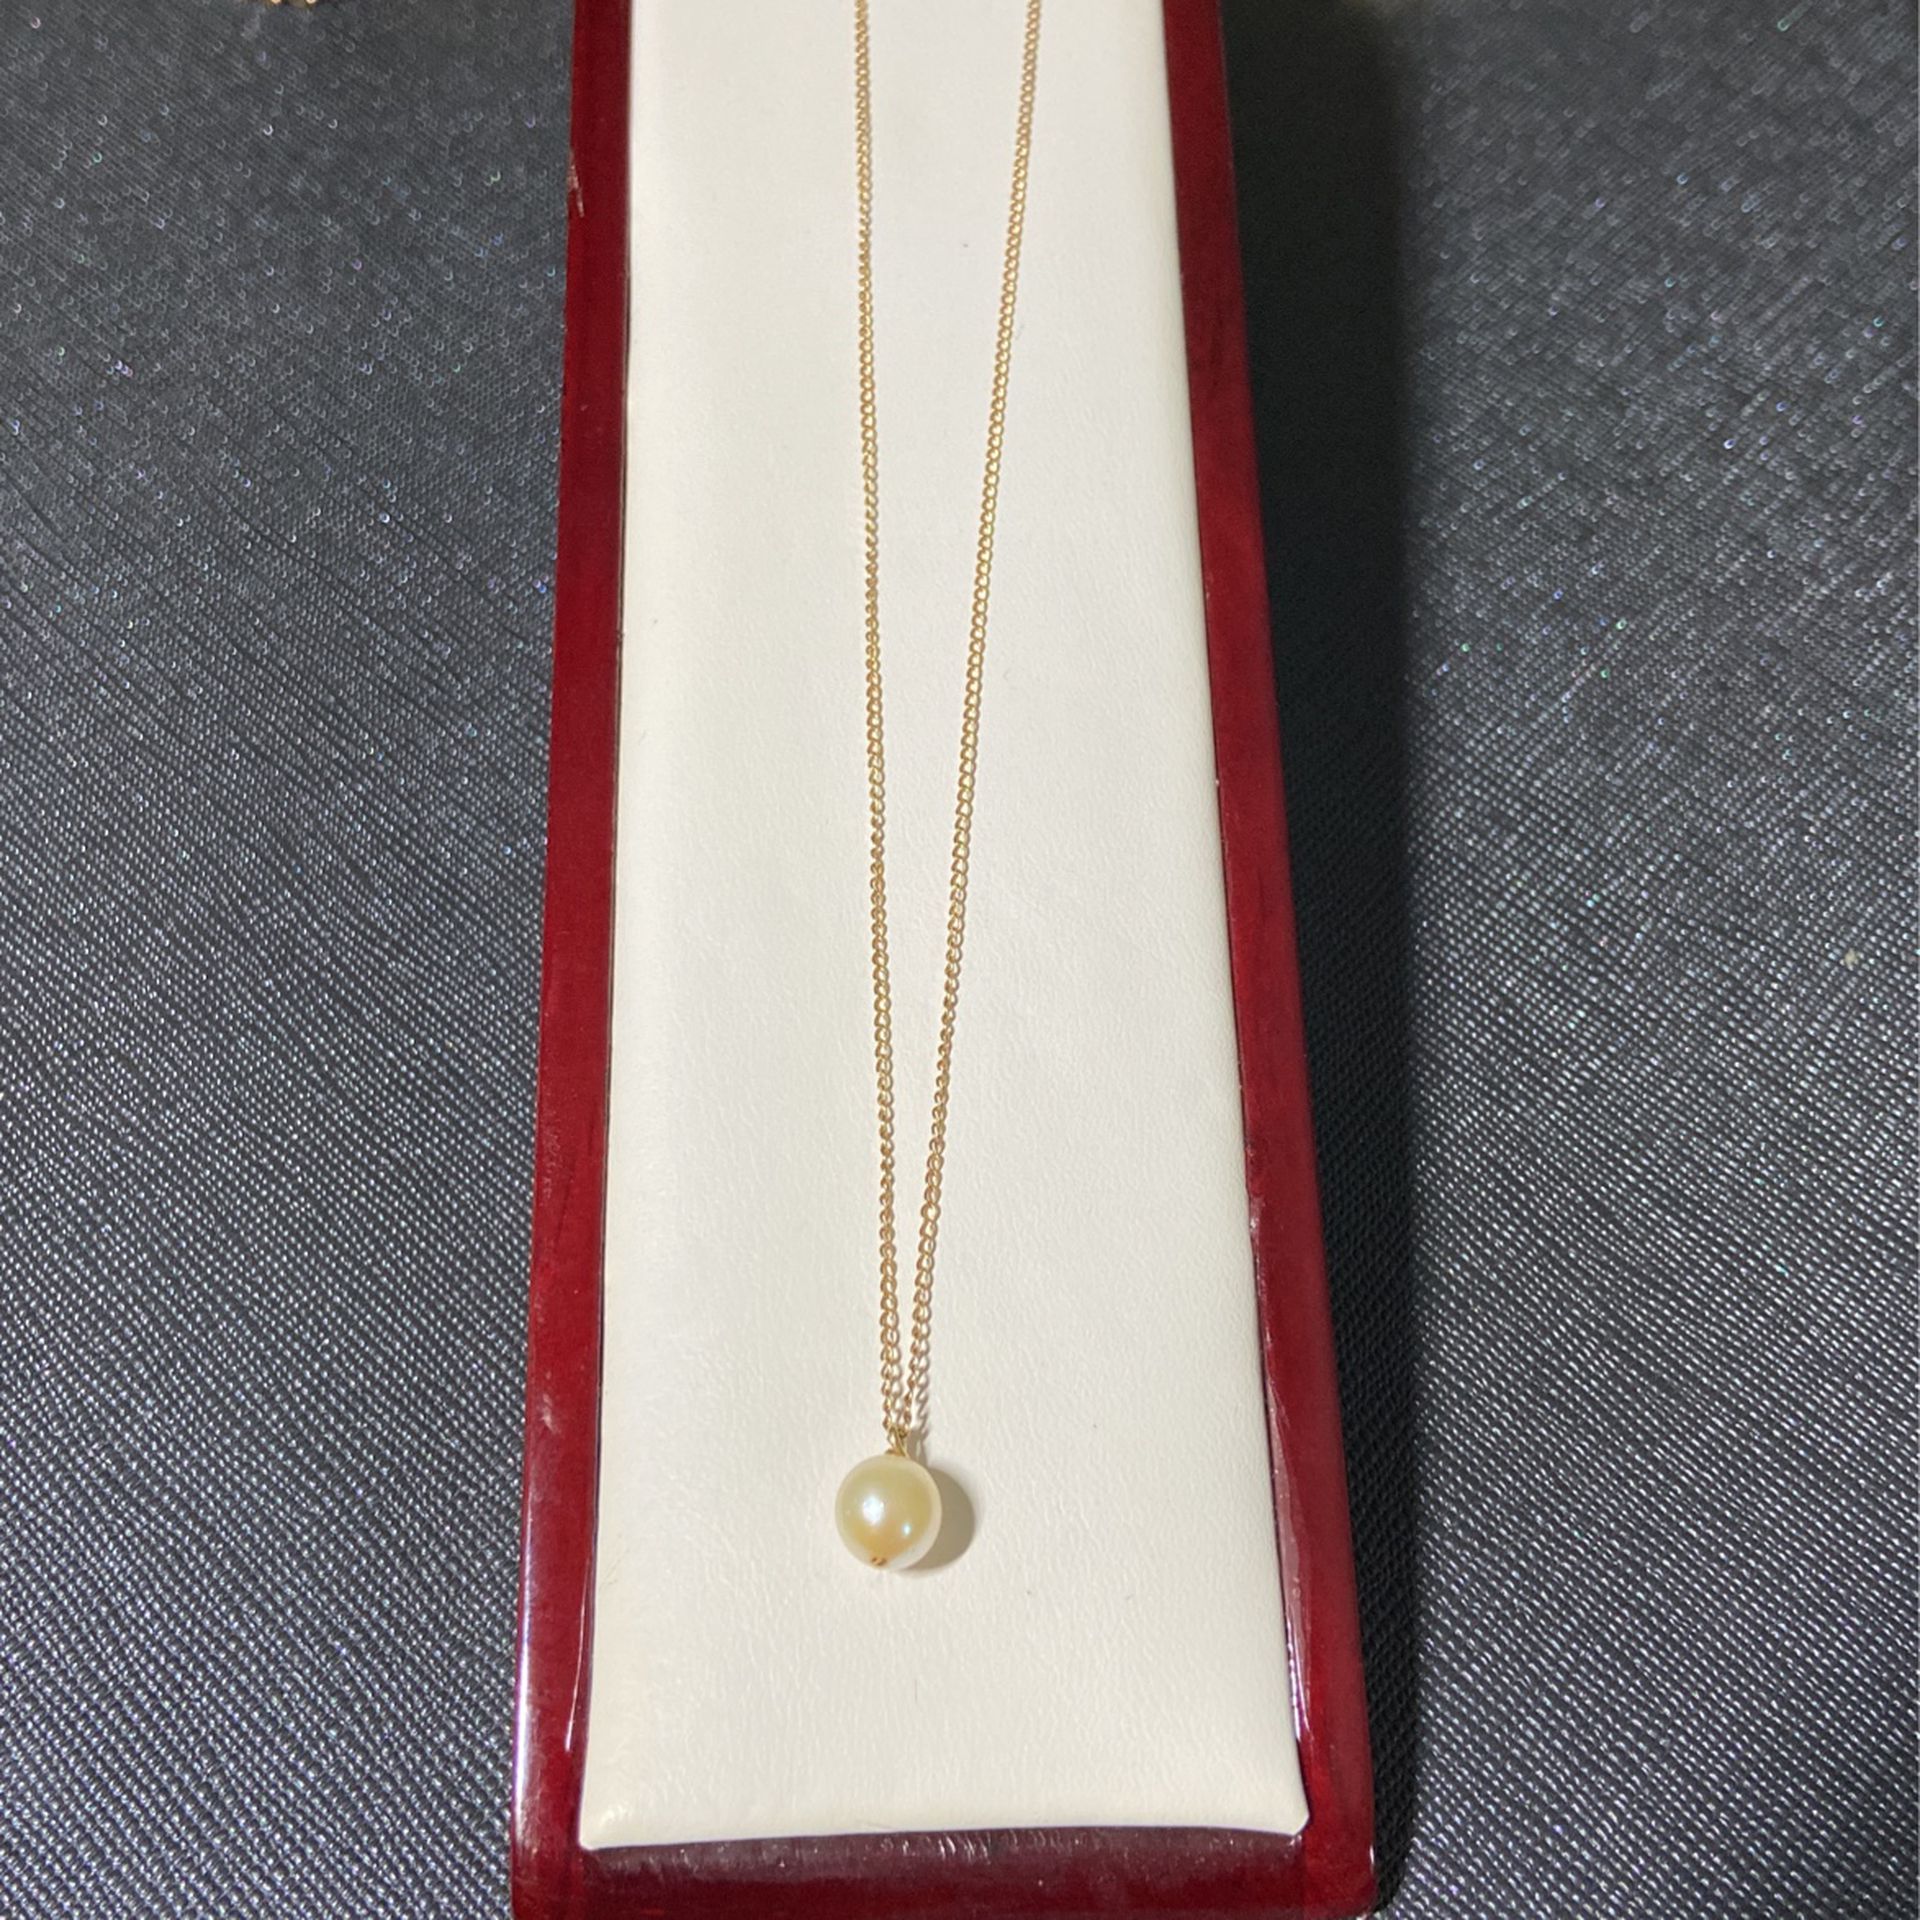 10K Gold Necklace w/ Pearl Pendant